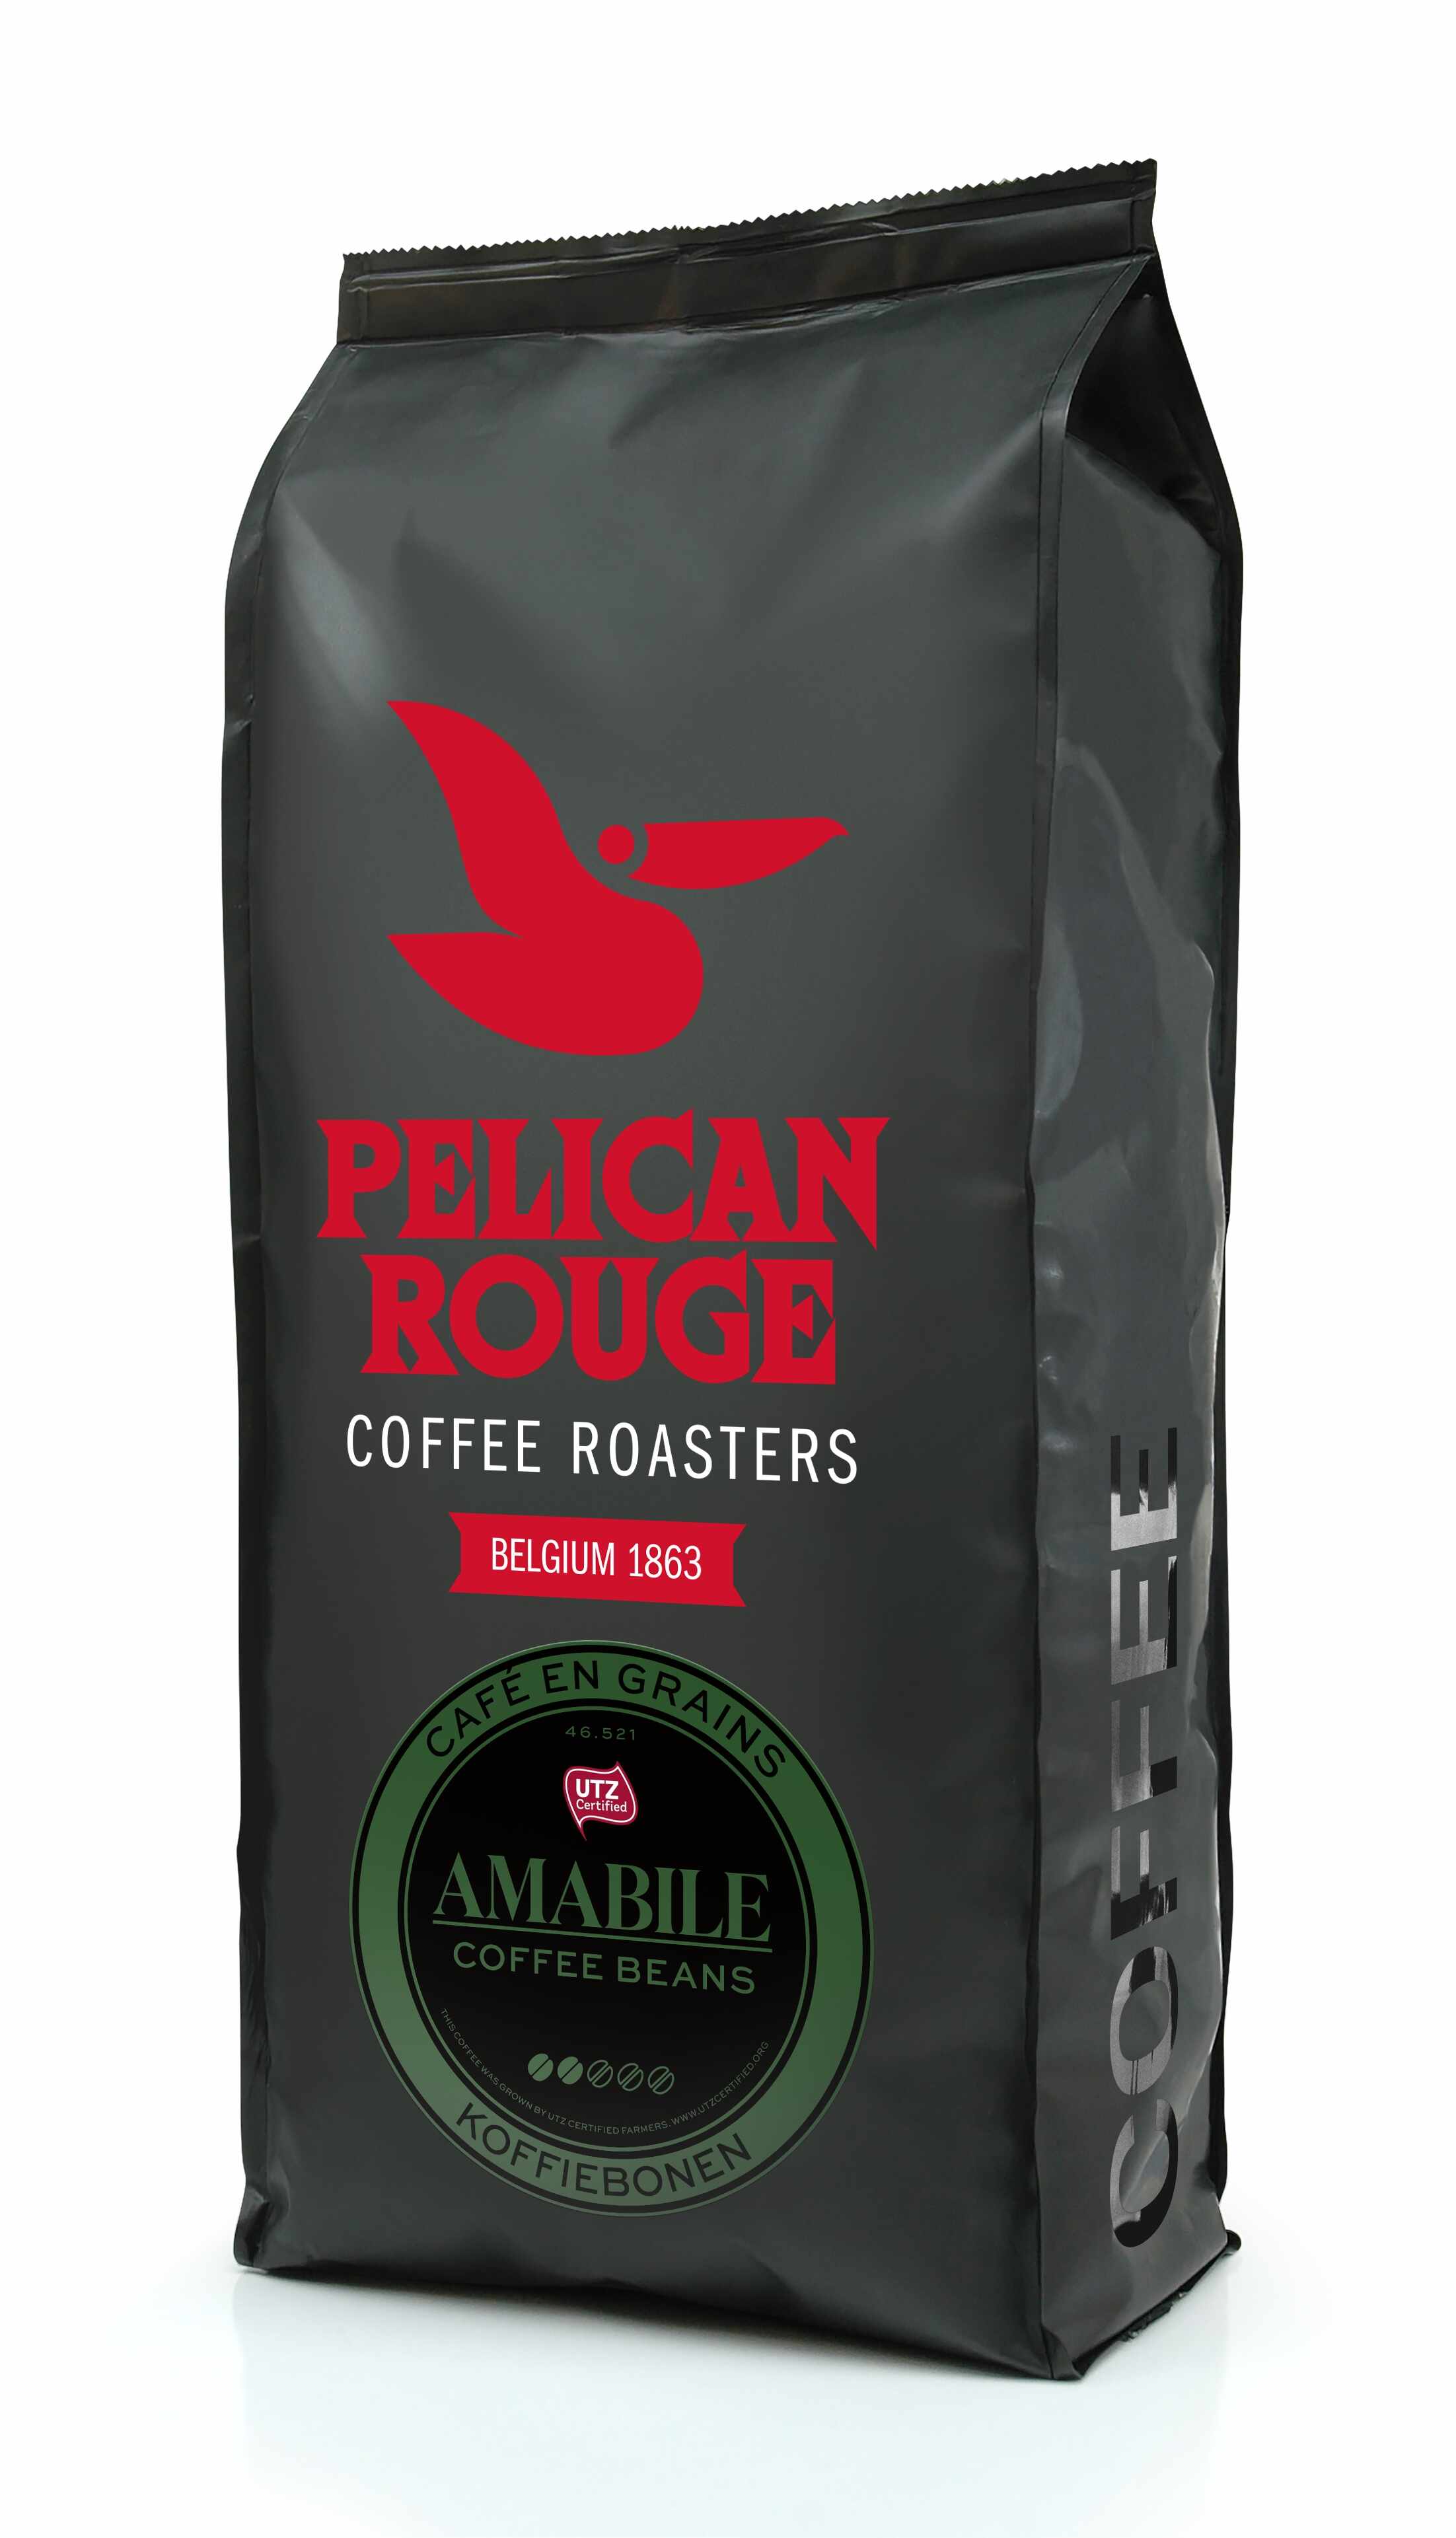 Pelican Rouge Amabile cafea boabe 1kg